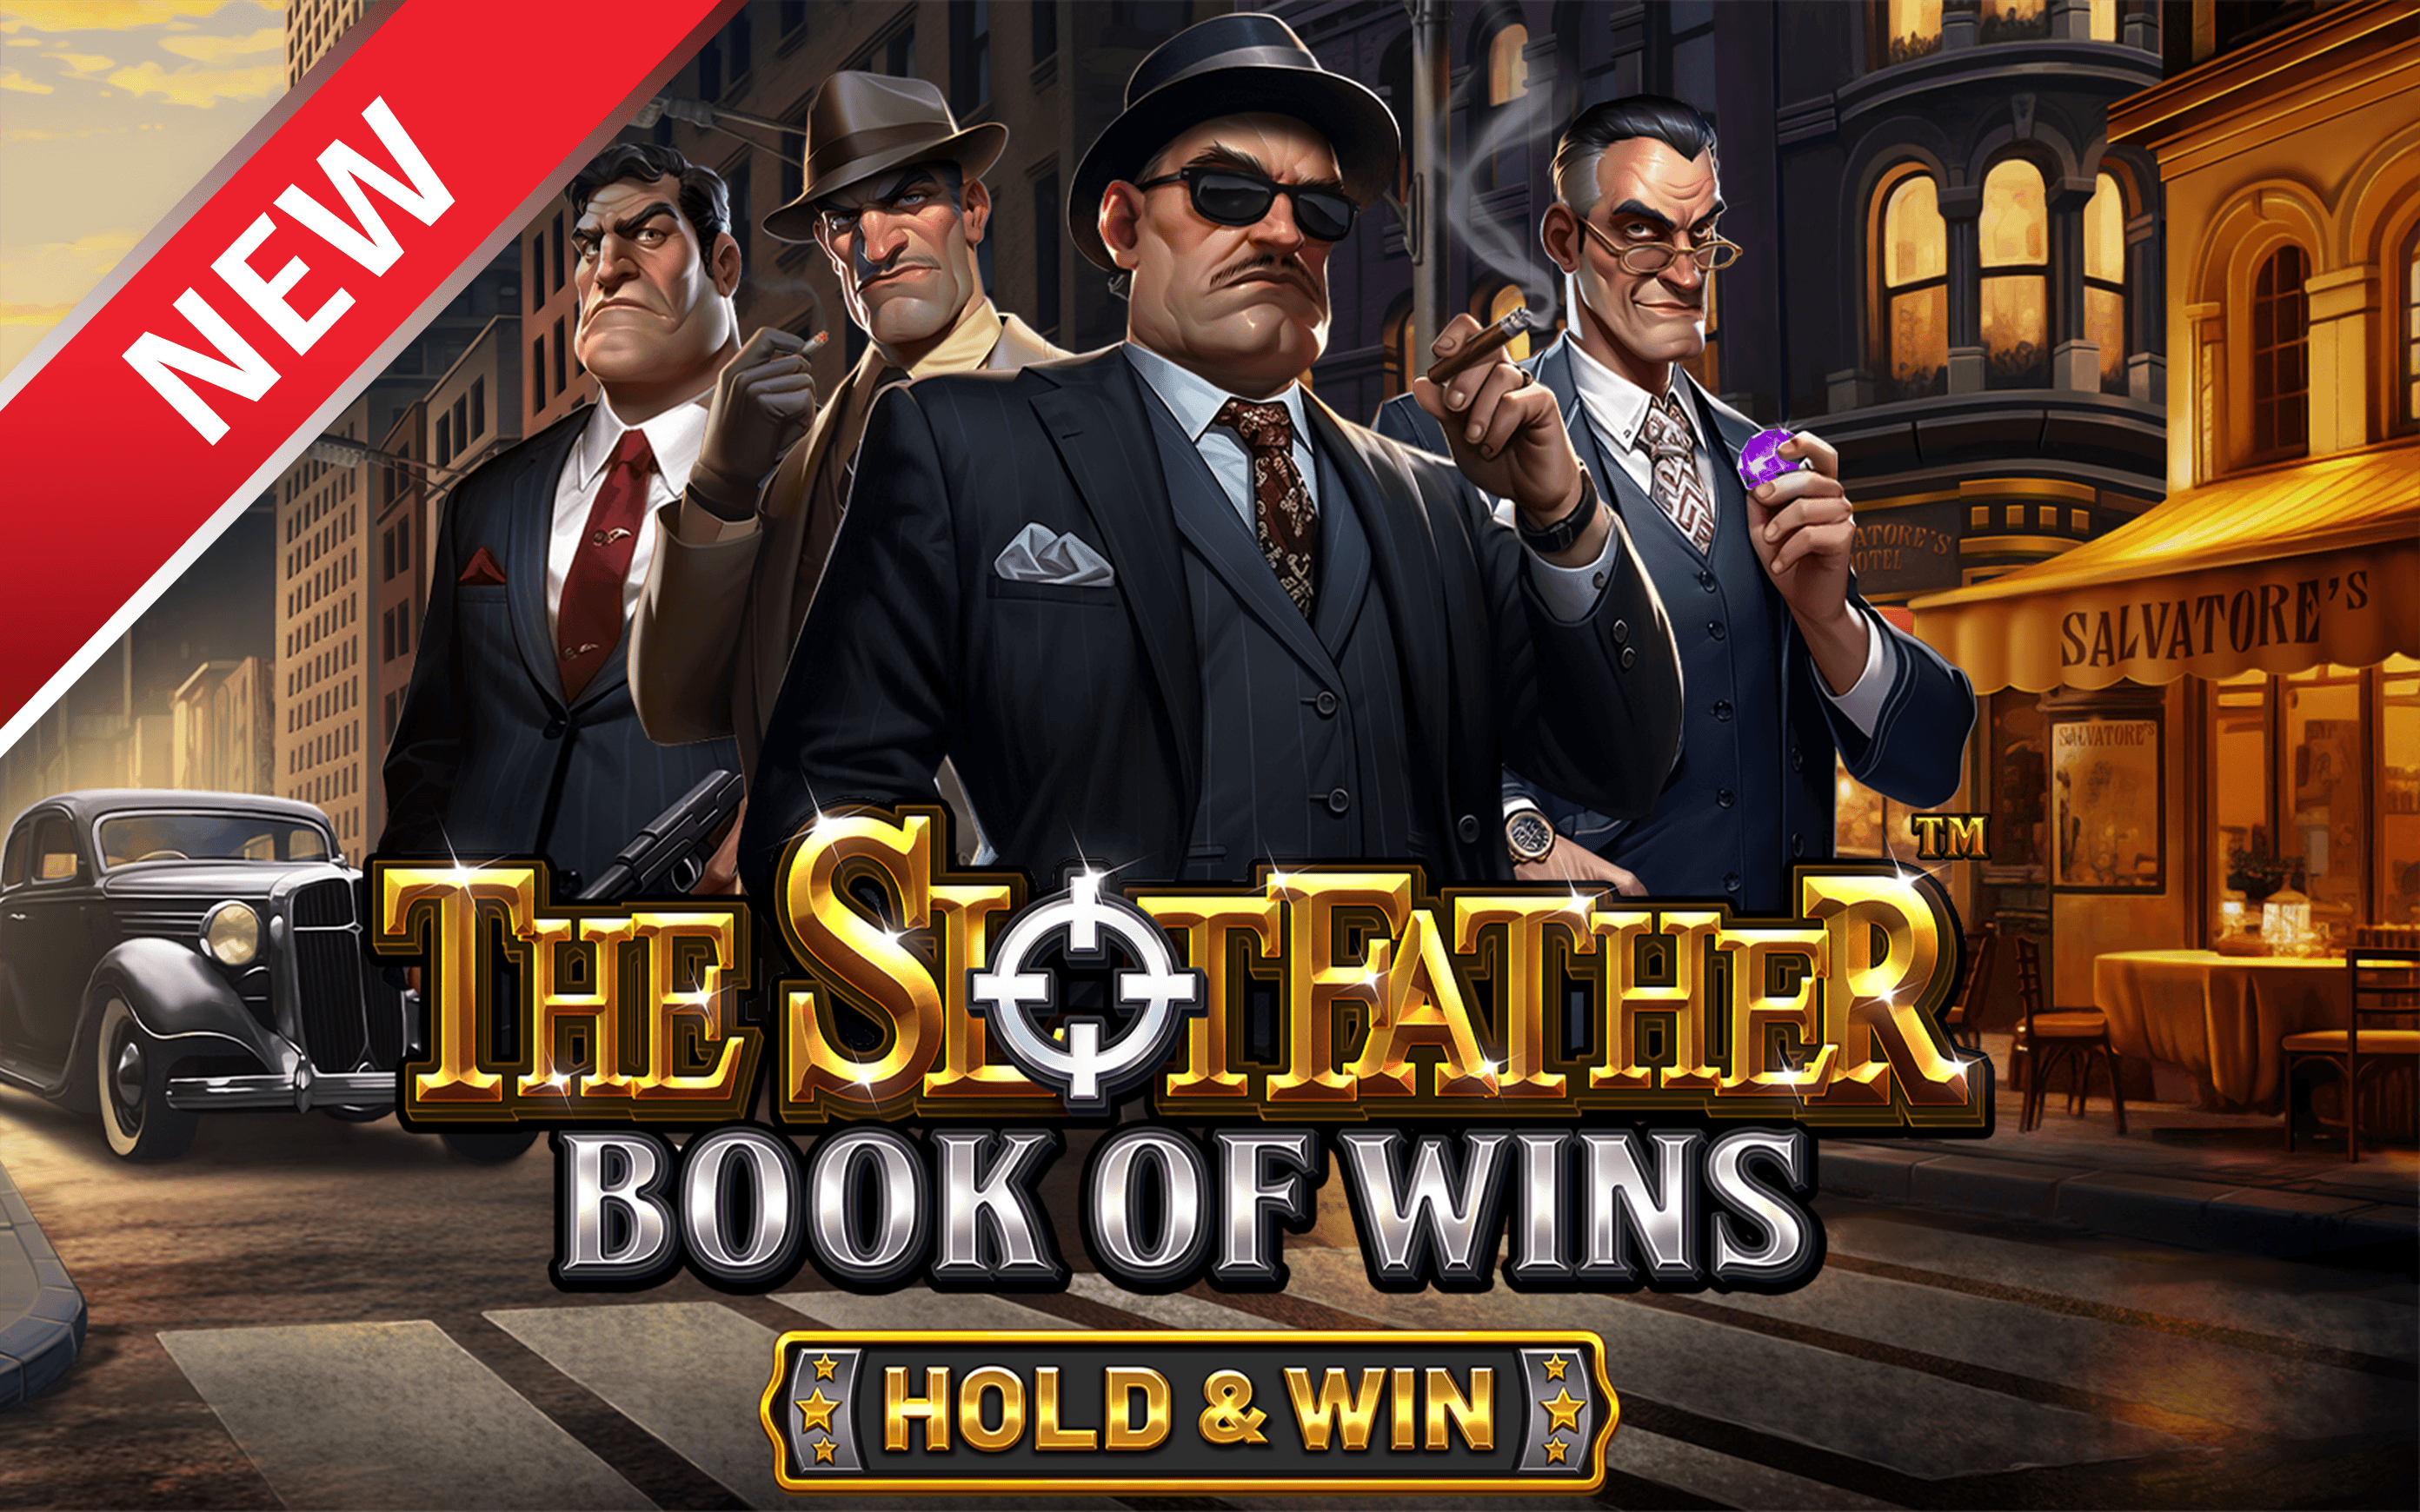 Speel The Slotfather: Book of Wins - Hold & Win™ op Starcasino.be online casino